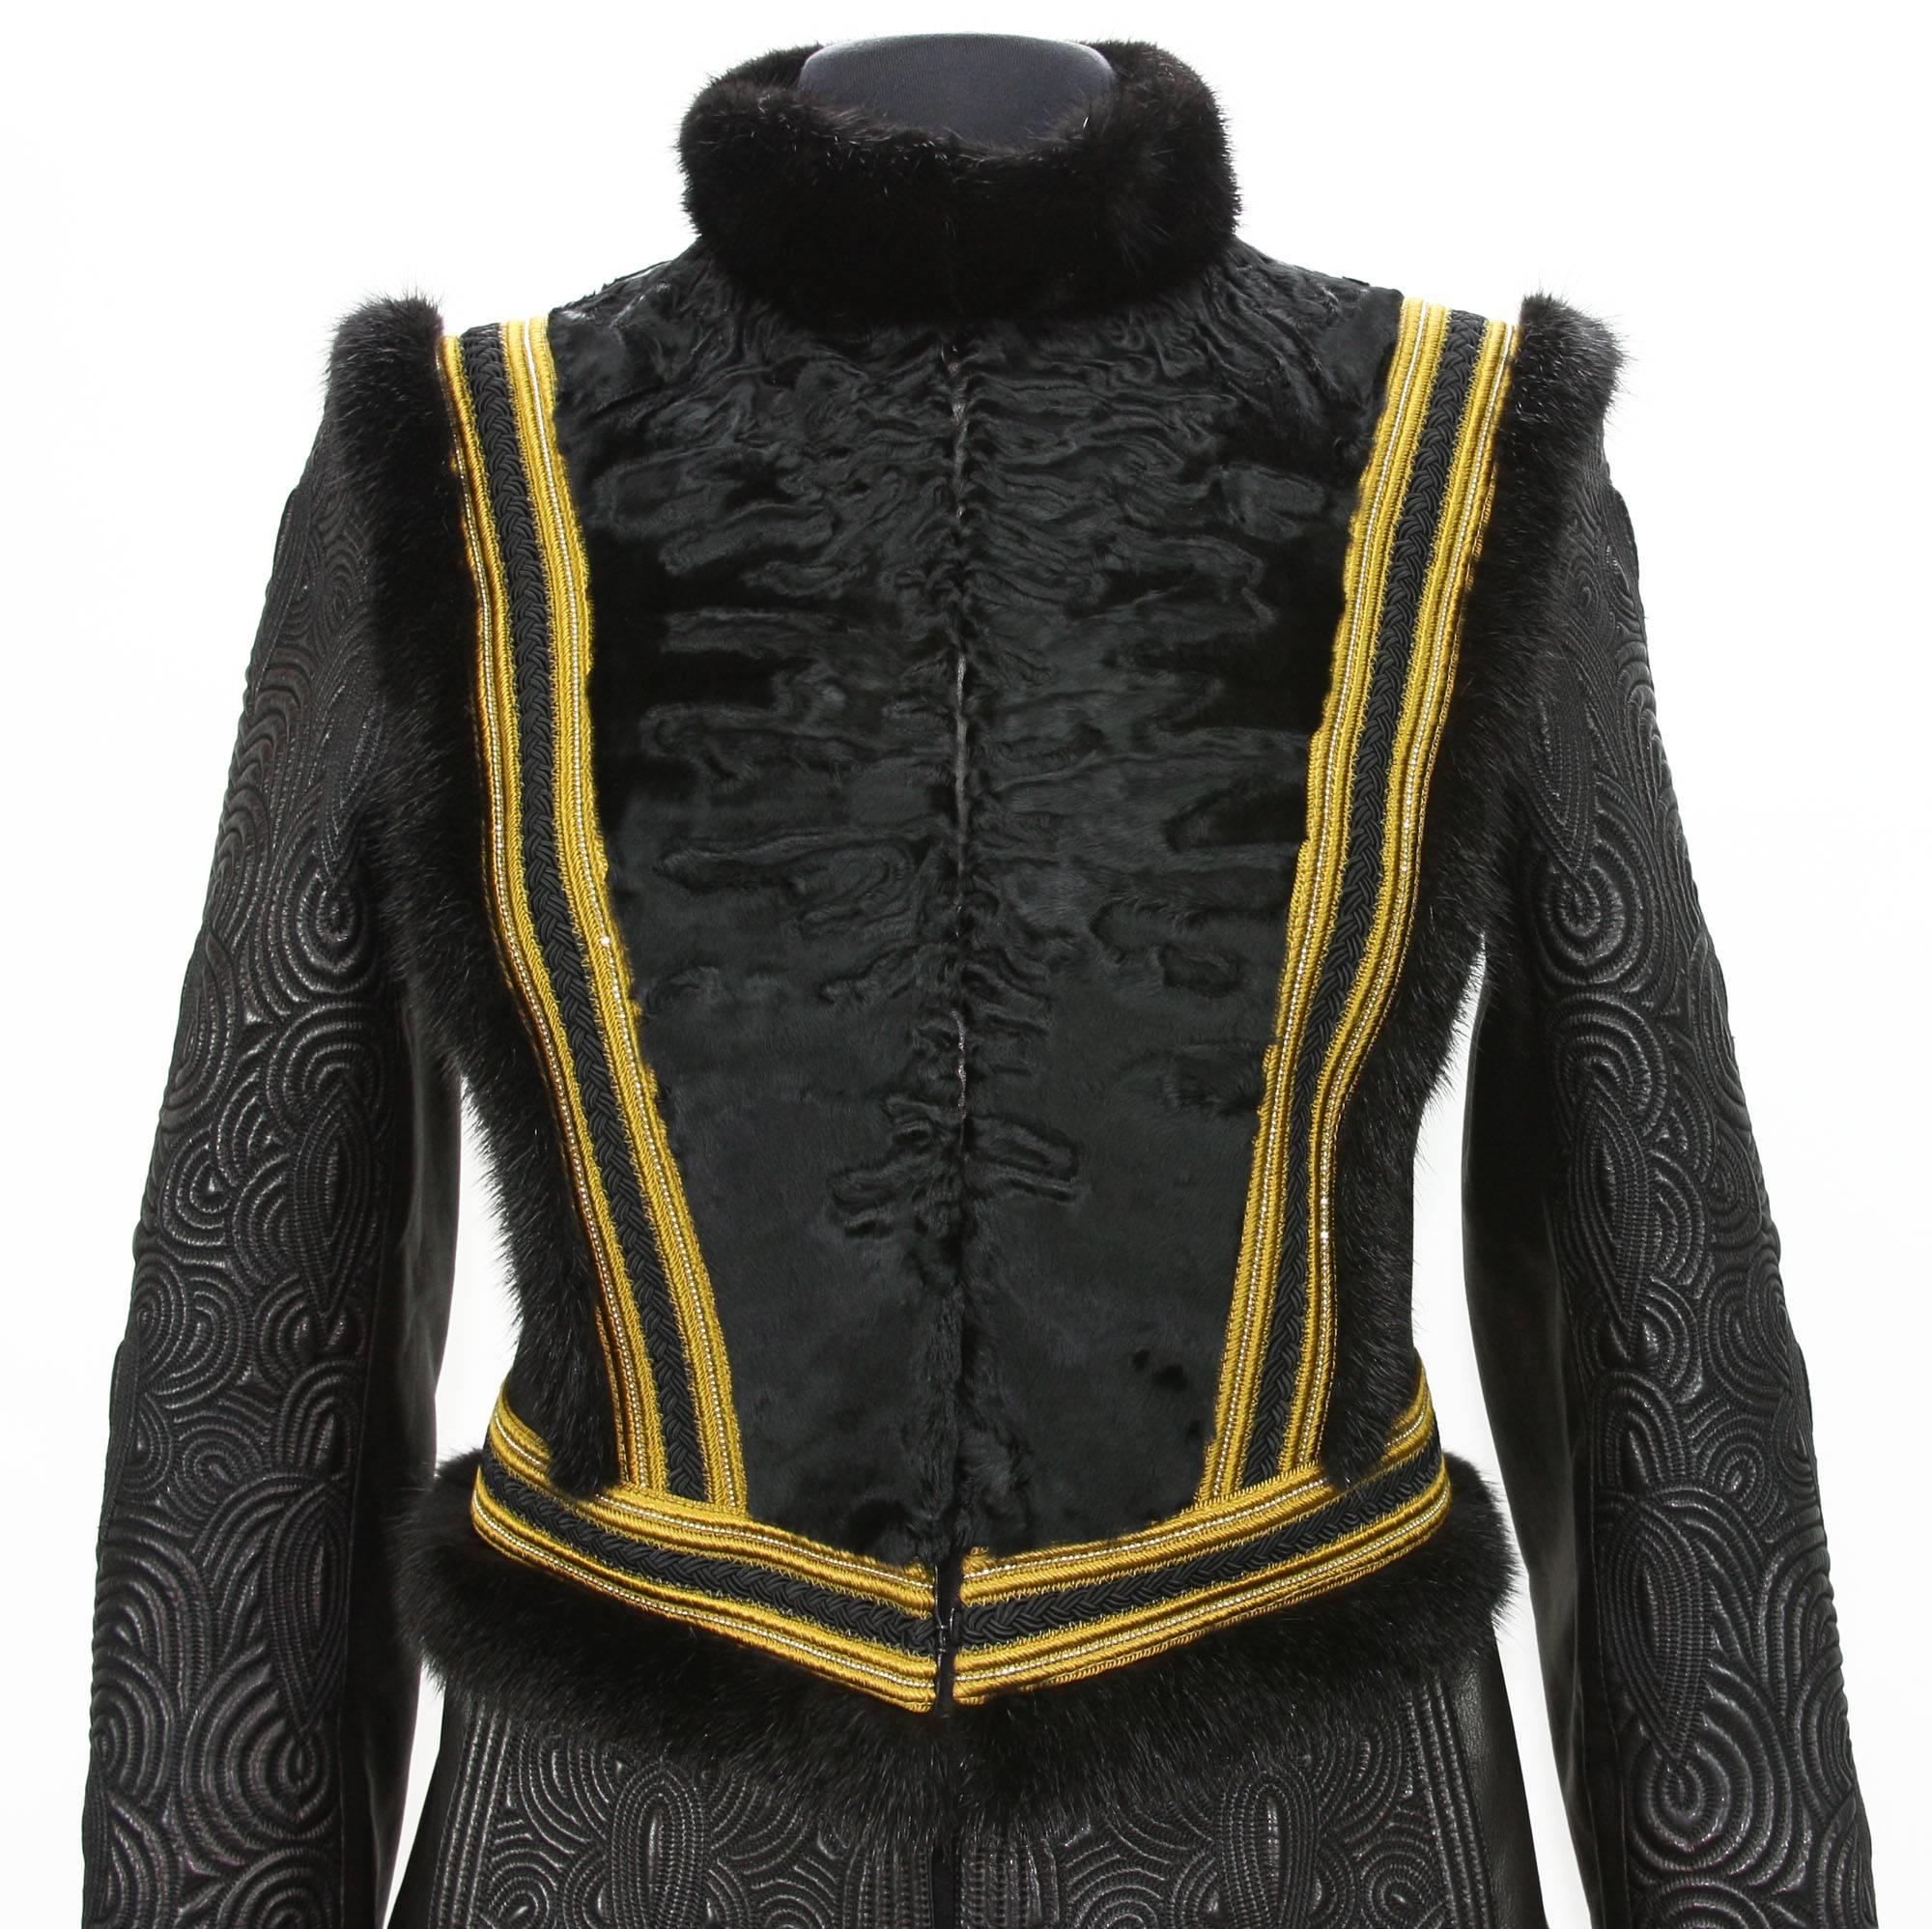 Women's NEW Exquisite $7650 ETRO Embossed Leather Mink Fur Lamb Jacket It.42 - US 6 For Sale